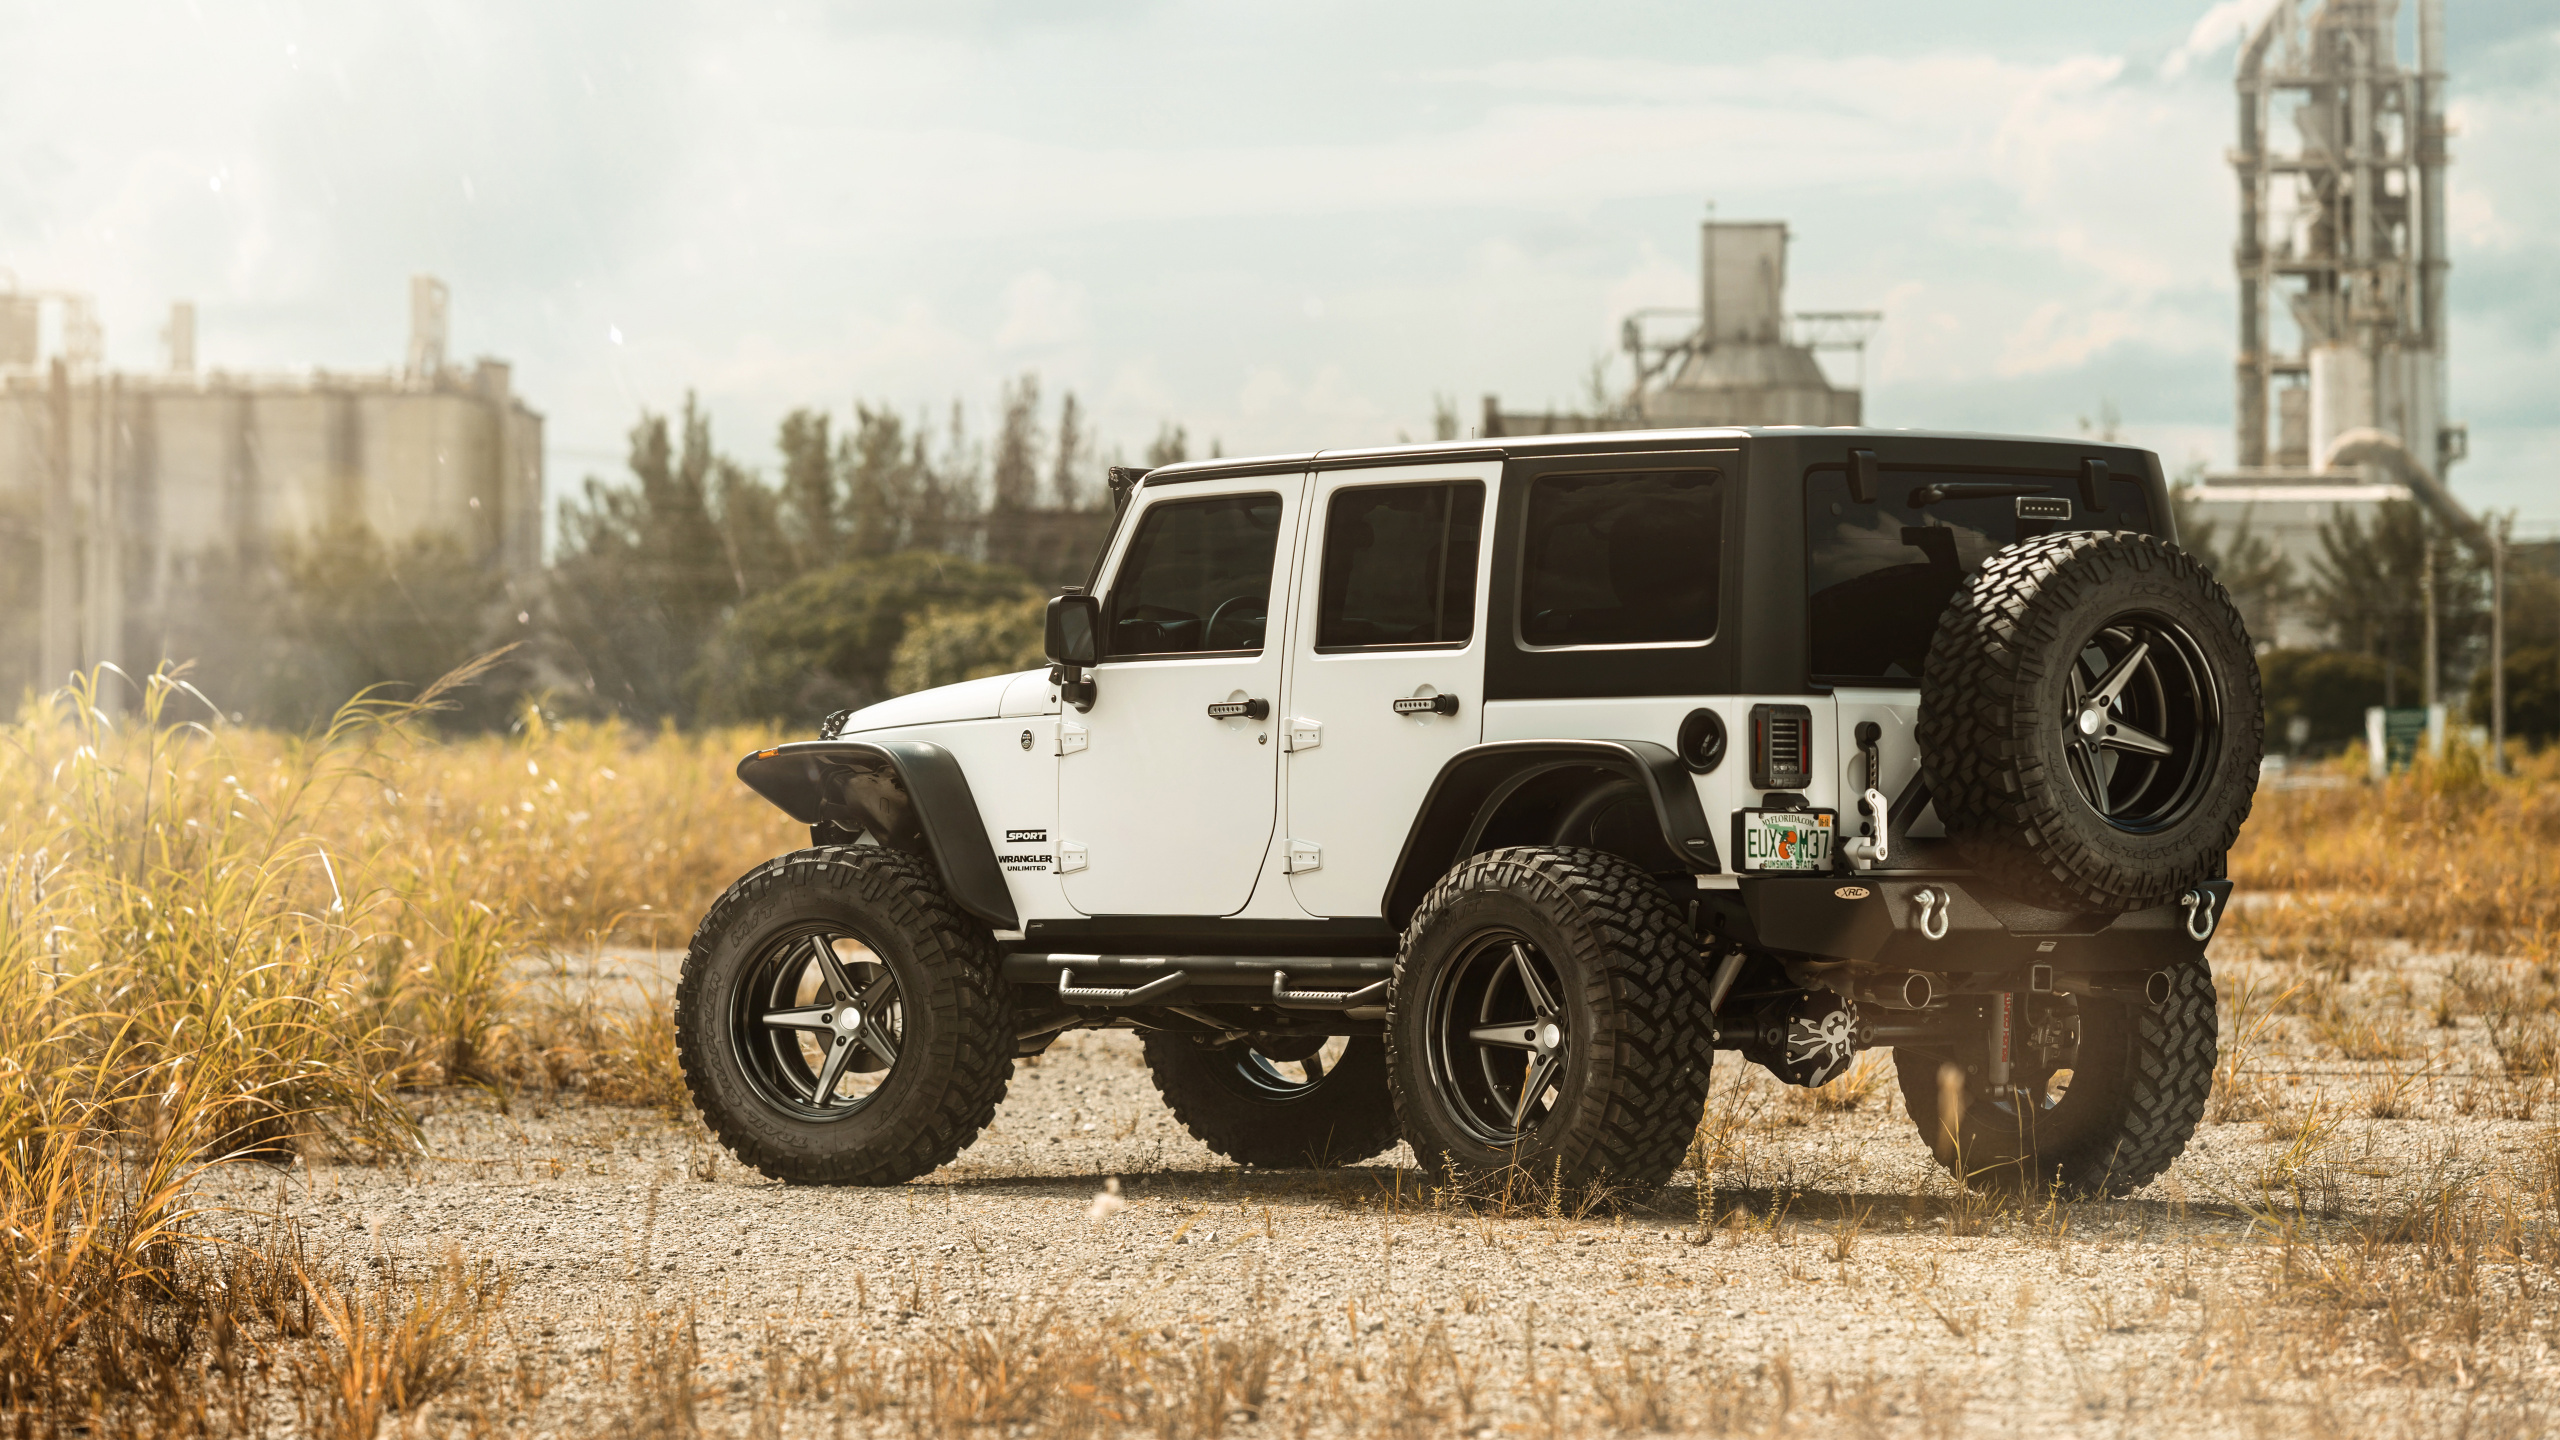 White and Black Jeep Wrangler on Brown Field During Daytime. Wallpaper in 2560x1440 Resolution